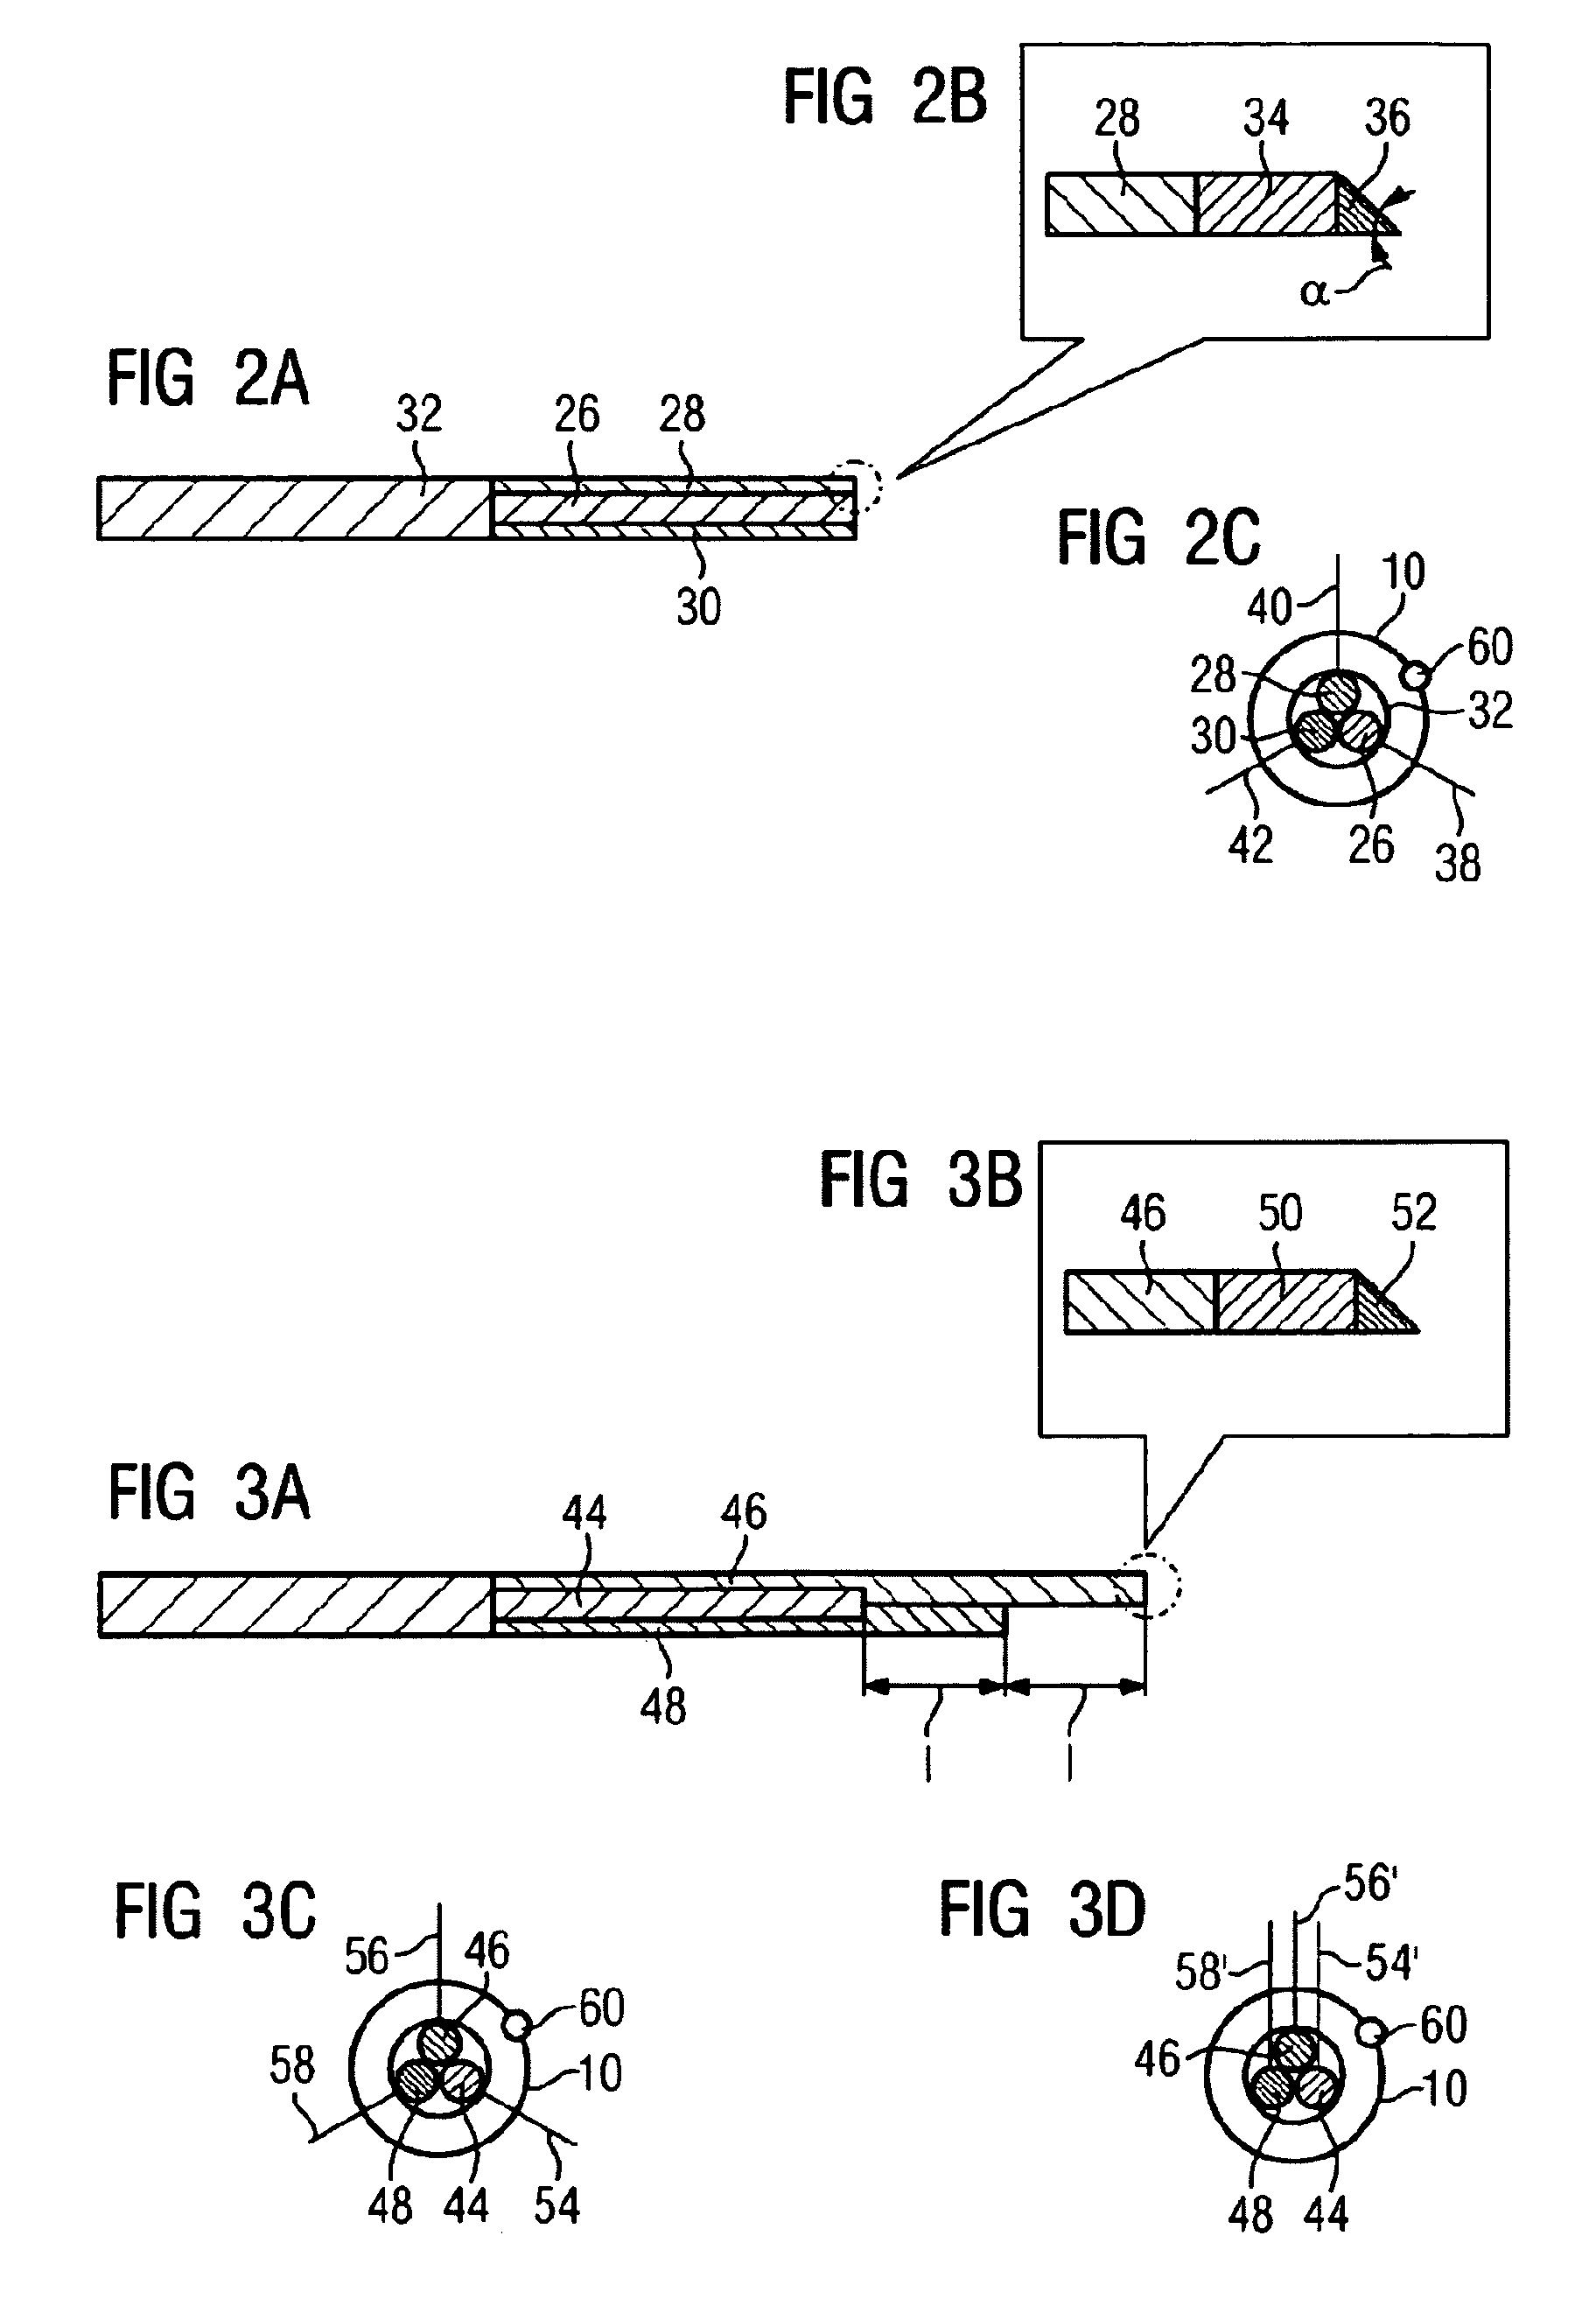 Optical coherence tomography system